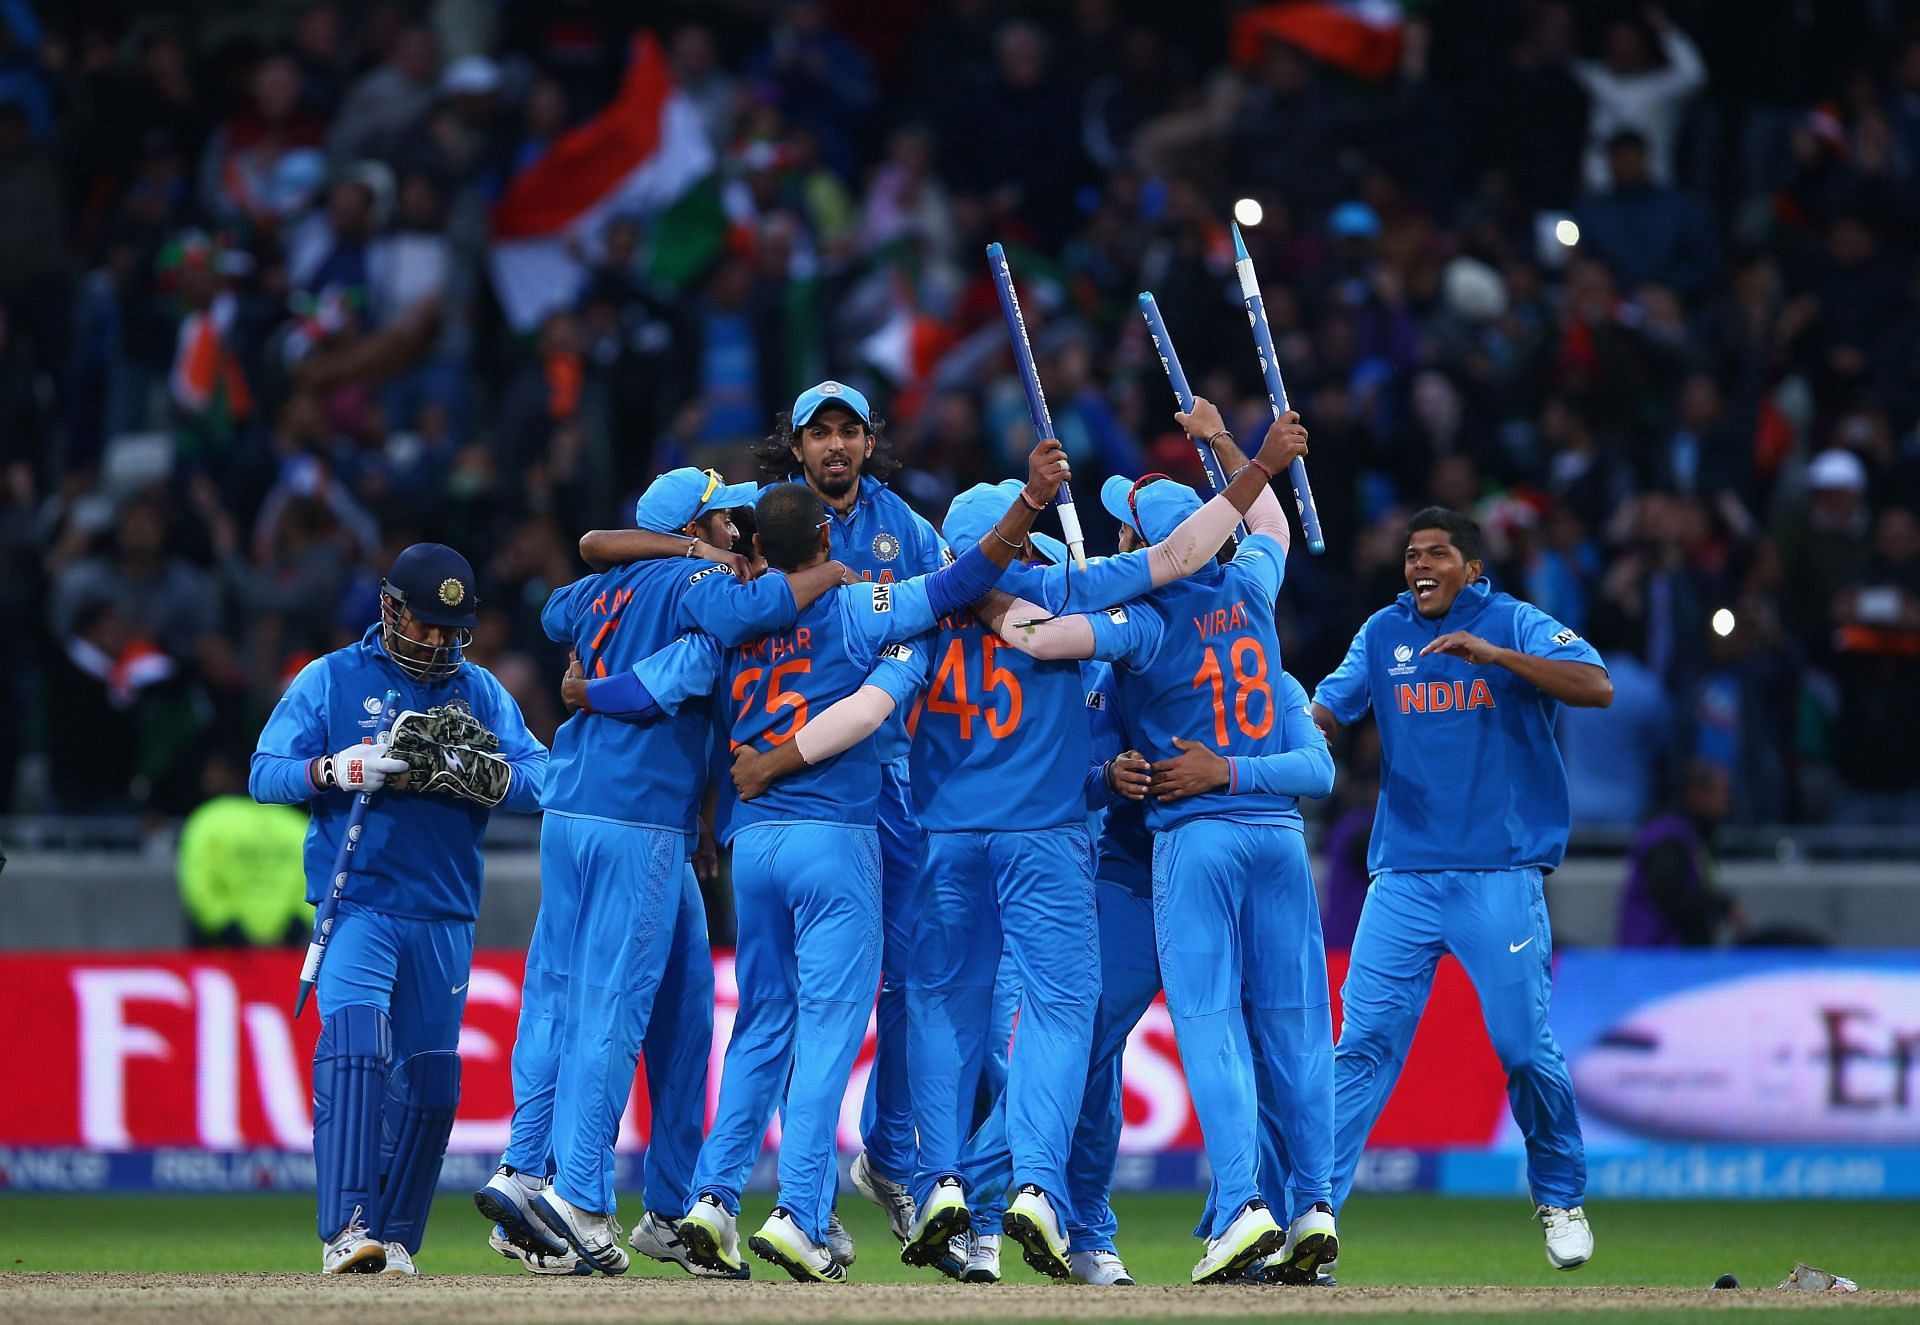 The Men in Blue are ecstatic are winning the 2013 Champions Trophy. (Pic: Getty Images)